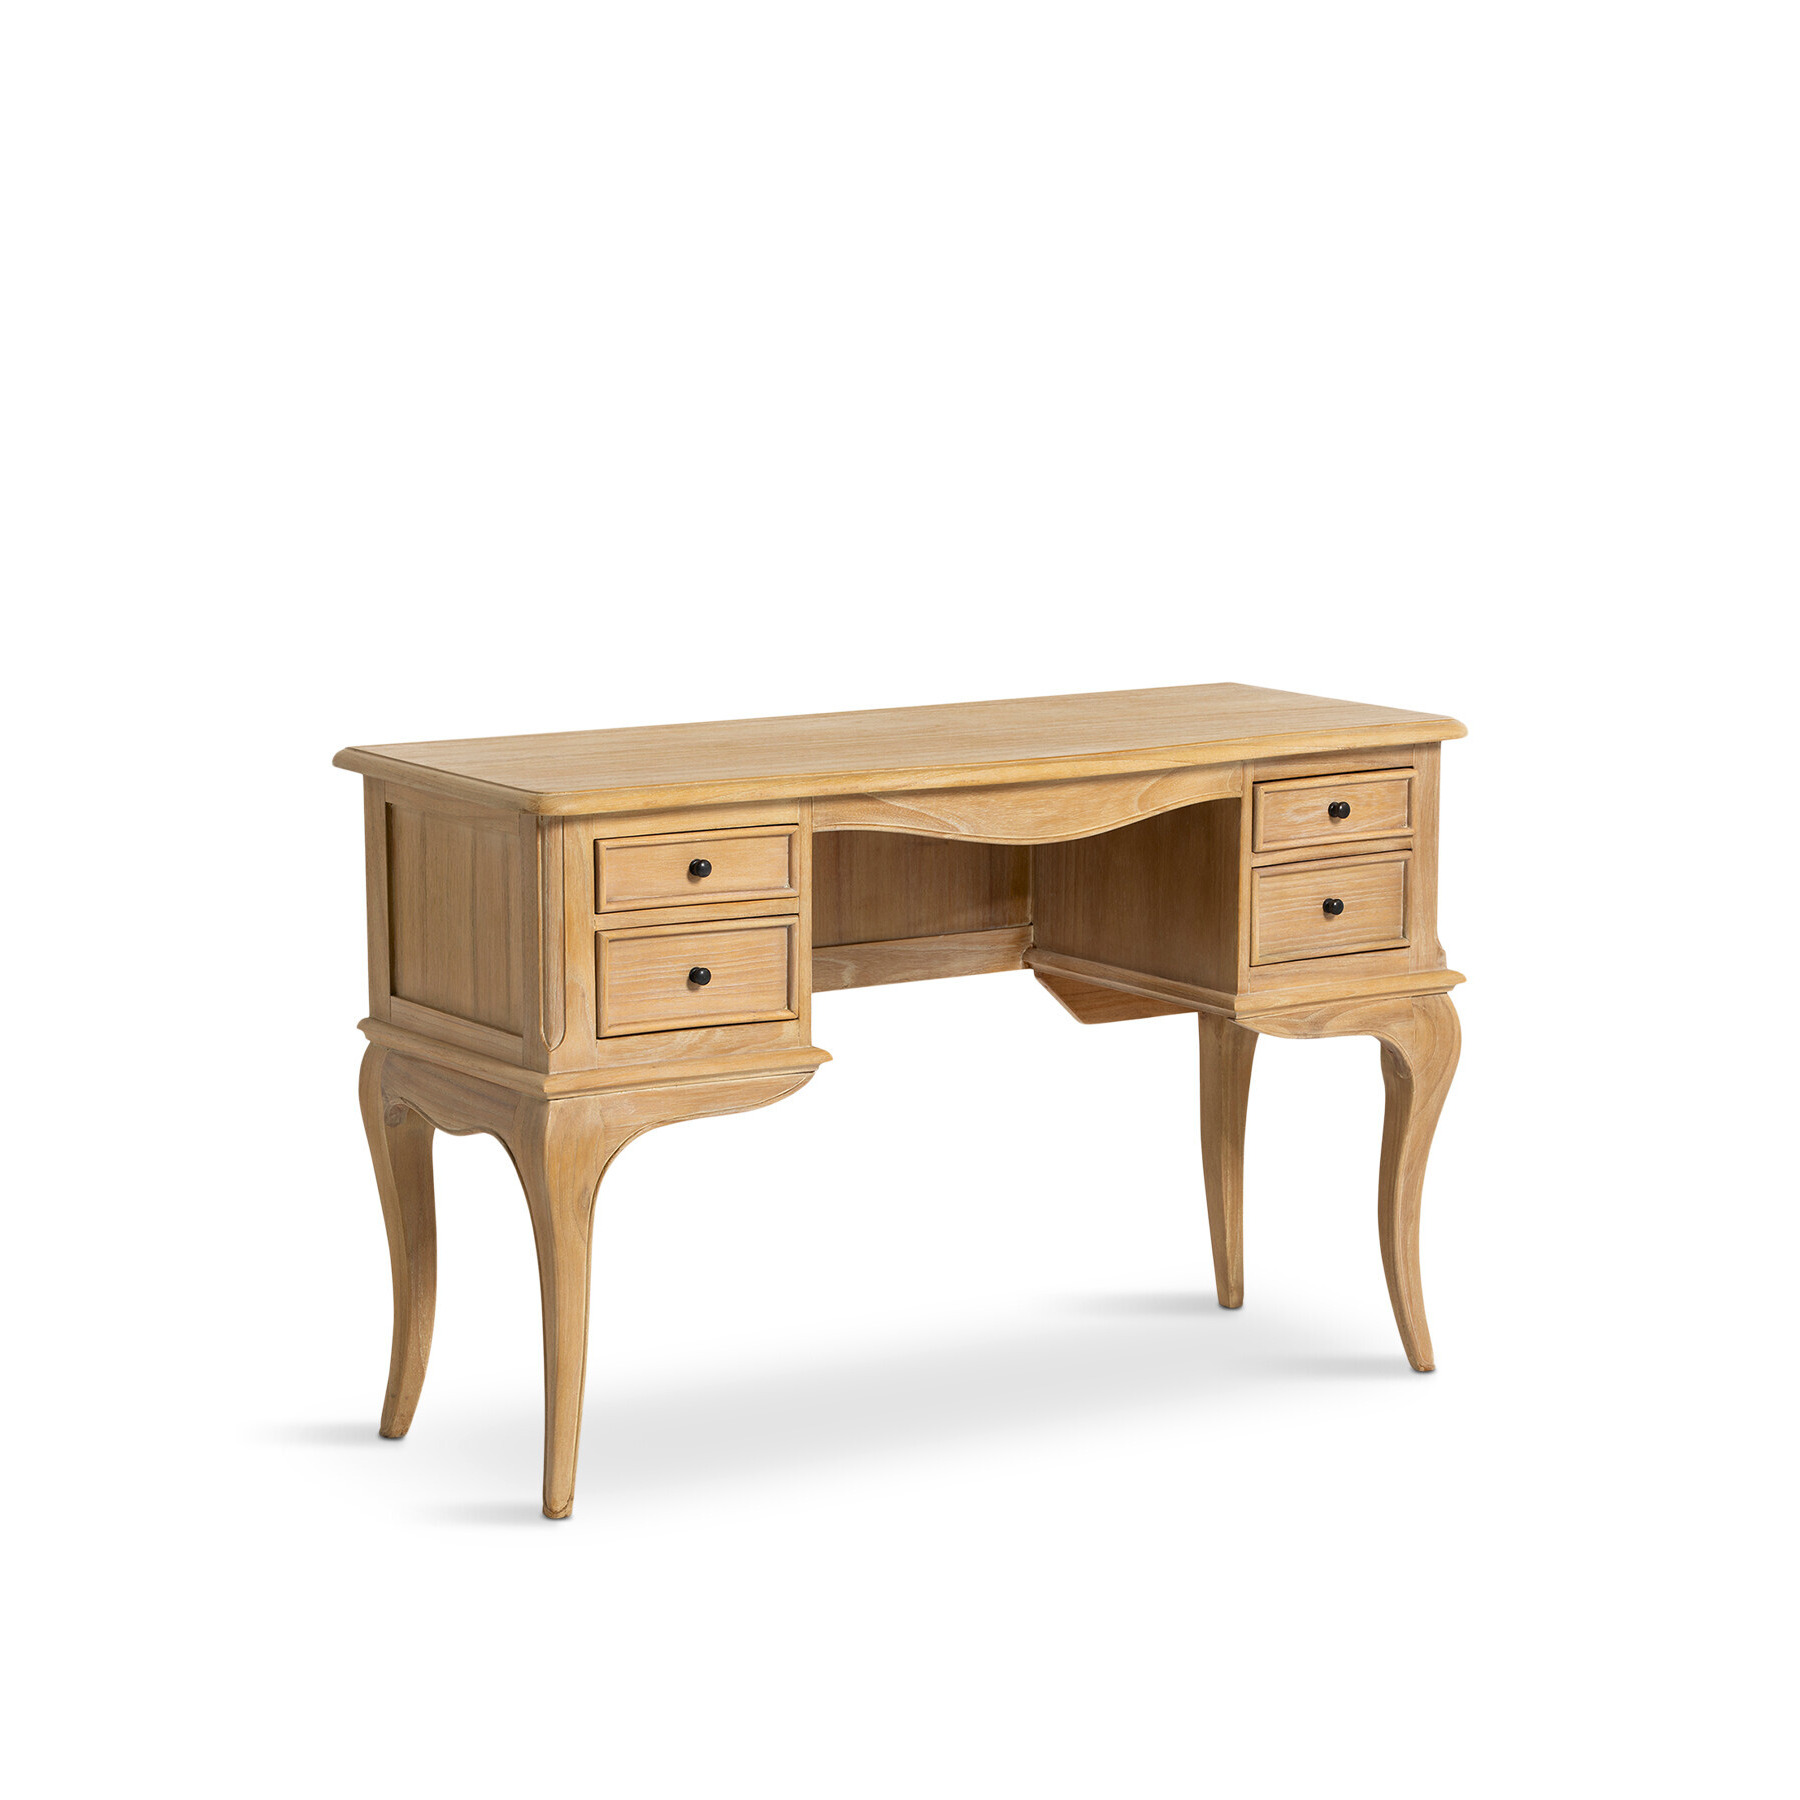 Barker and Stonehouse Cecile Light Wood French Style Dressing Table Neutral - image 1